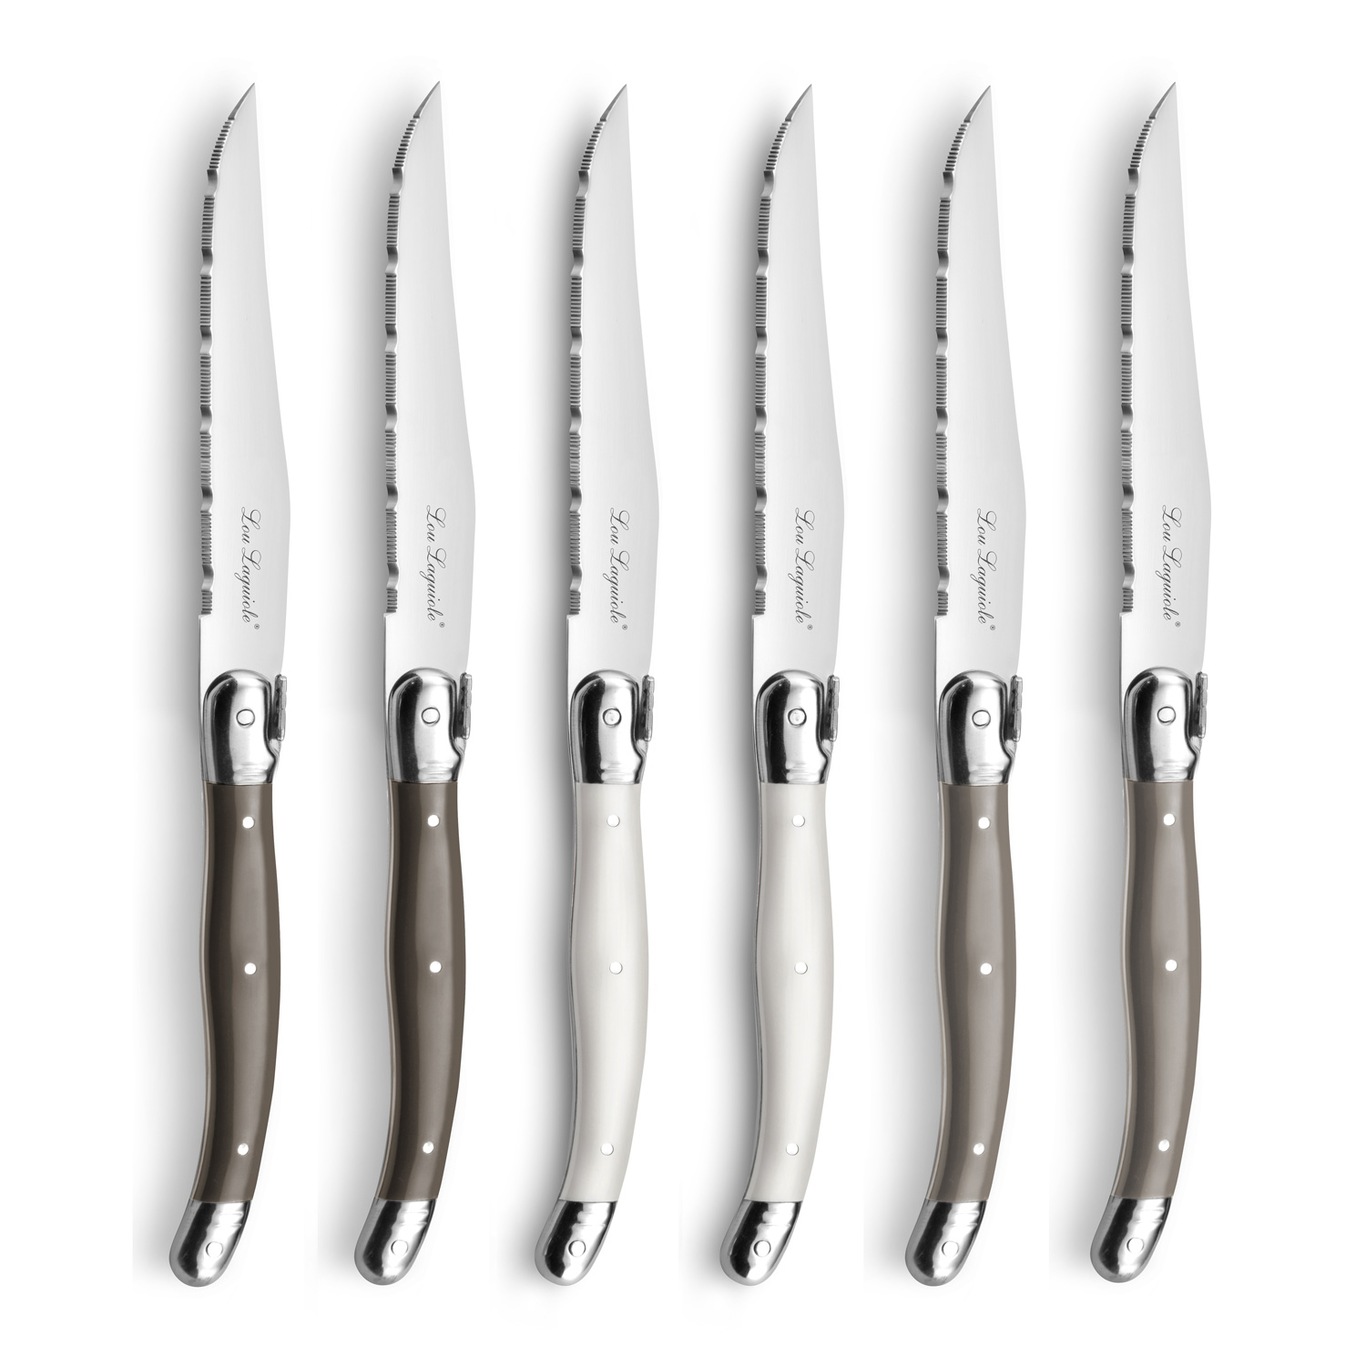 https://royaldesign.com/image/2/lou-laguiole-tradition-grill-knives-with-box-6-pack-2?w=800&quality=80